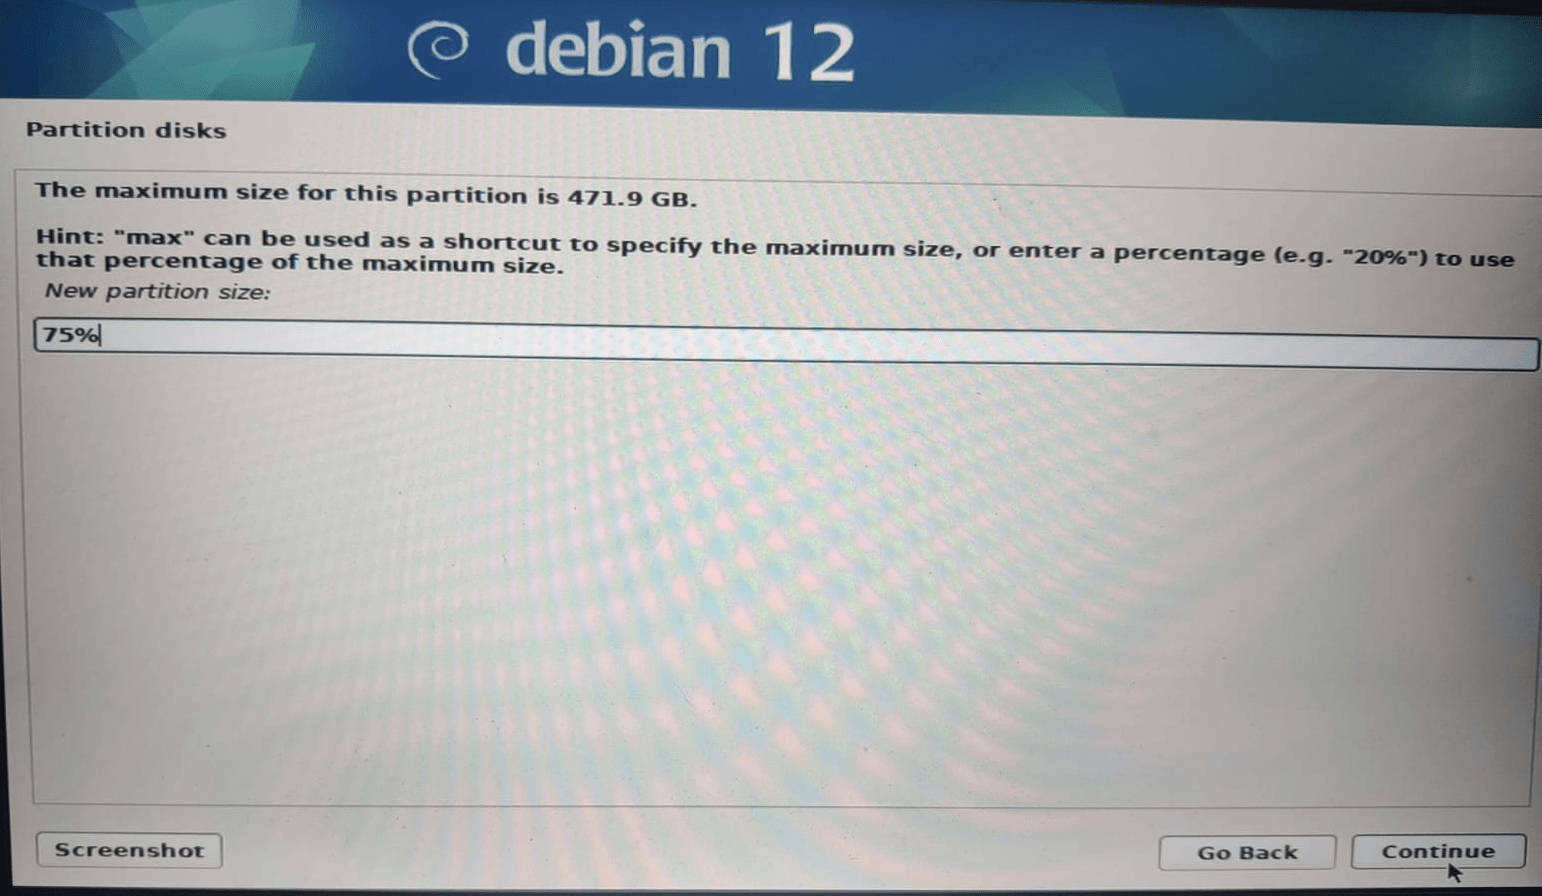 New Partition Size